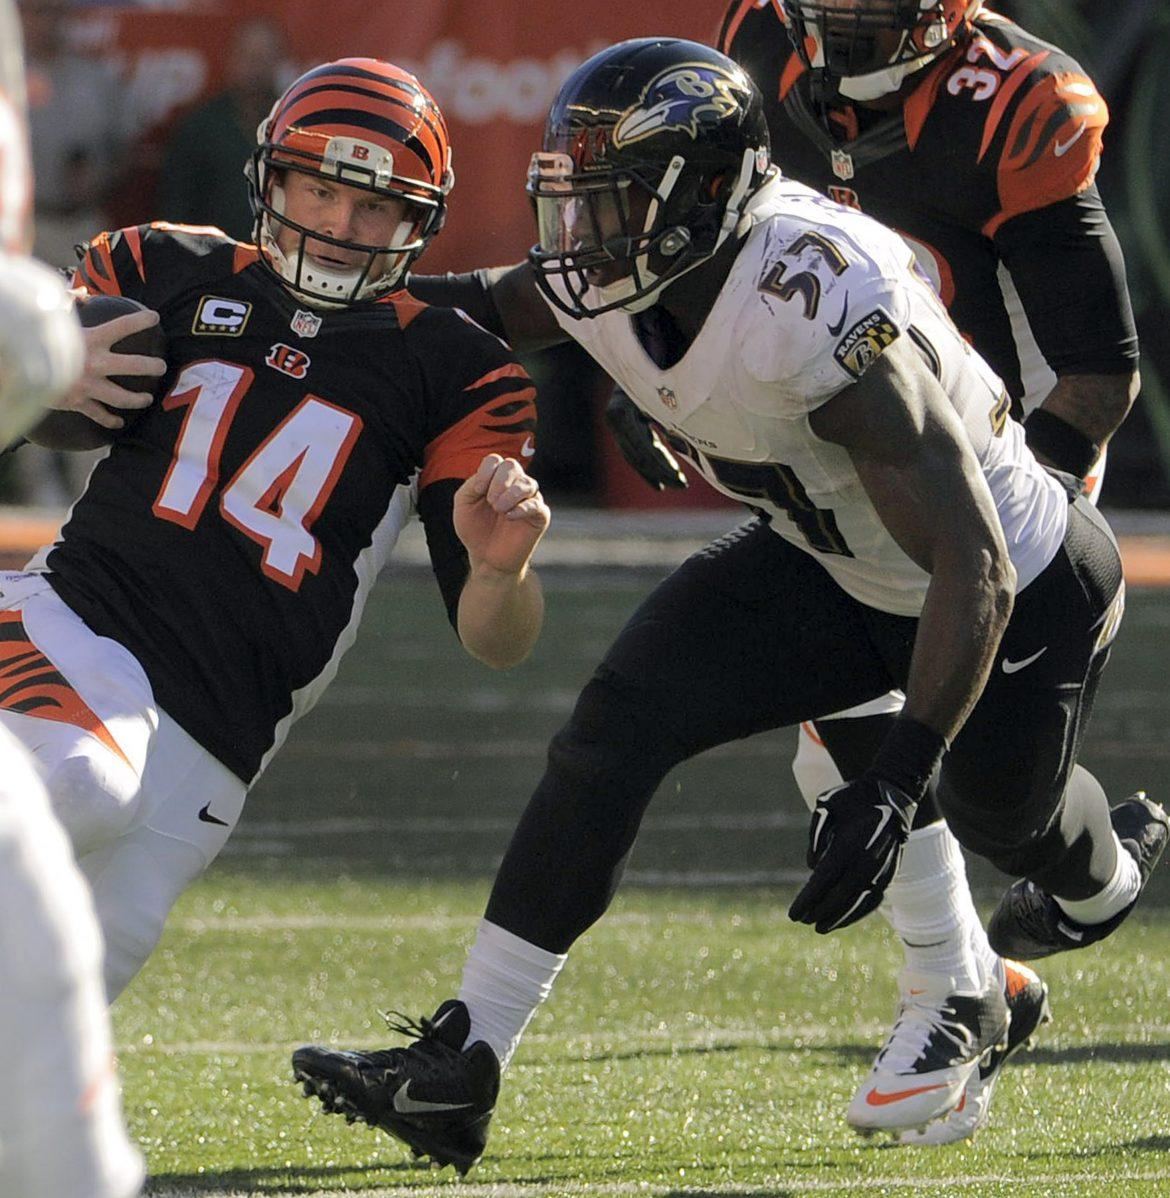 Andy Dalton stinks it up enough to make the Not list for Fantasy Football this week.